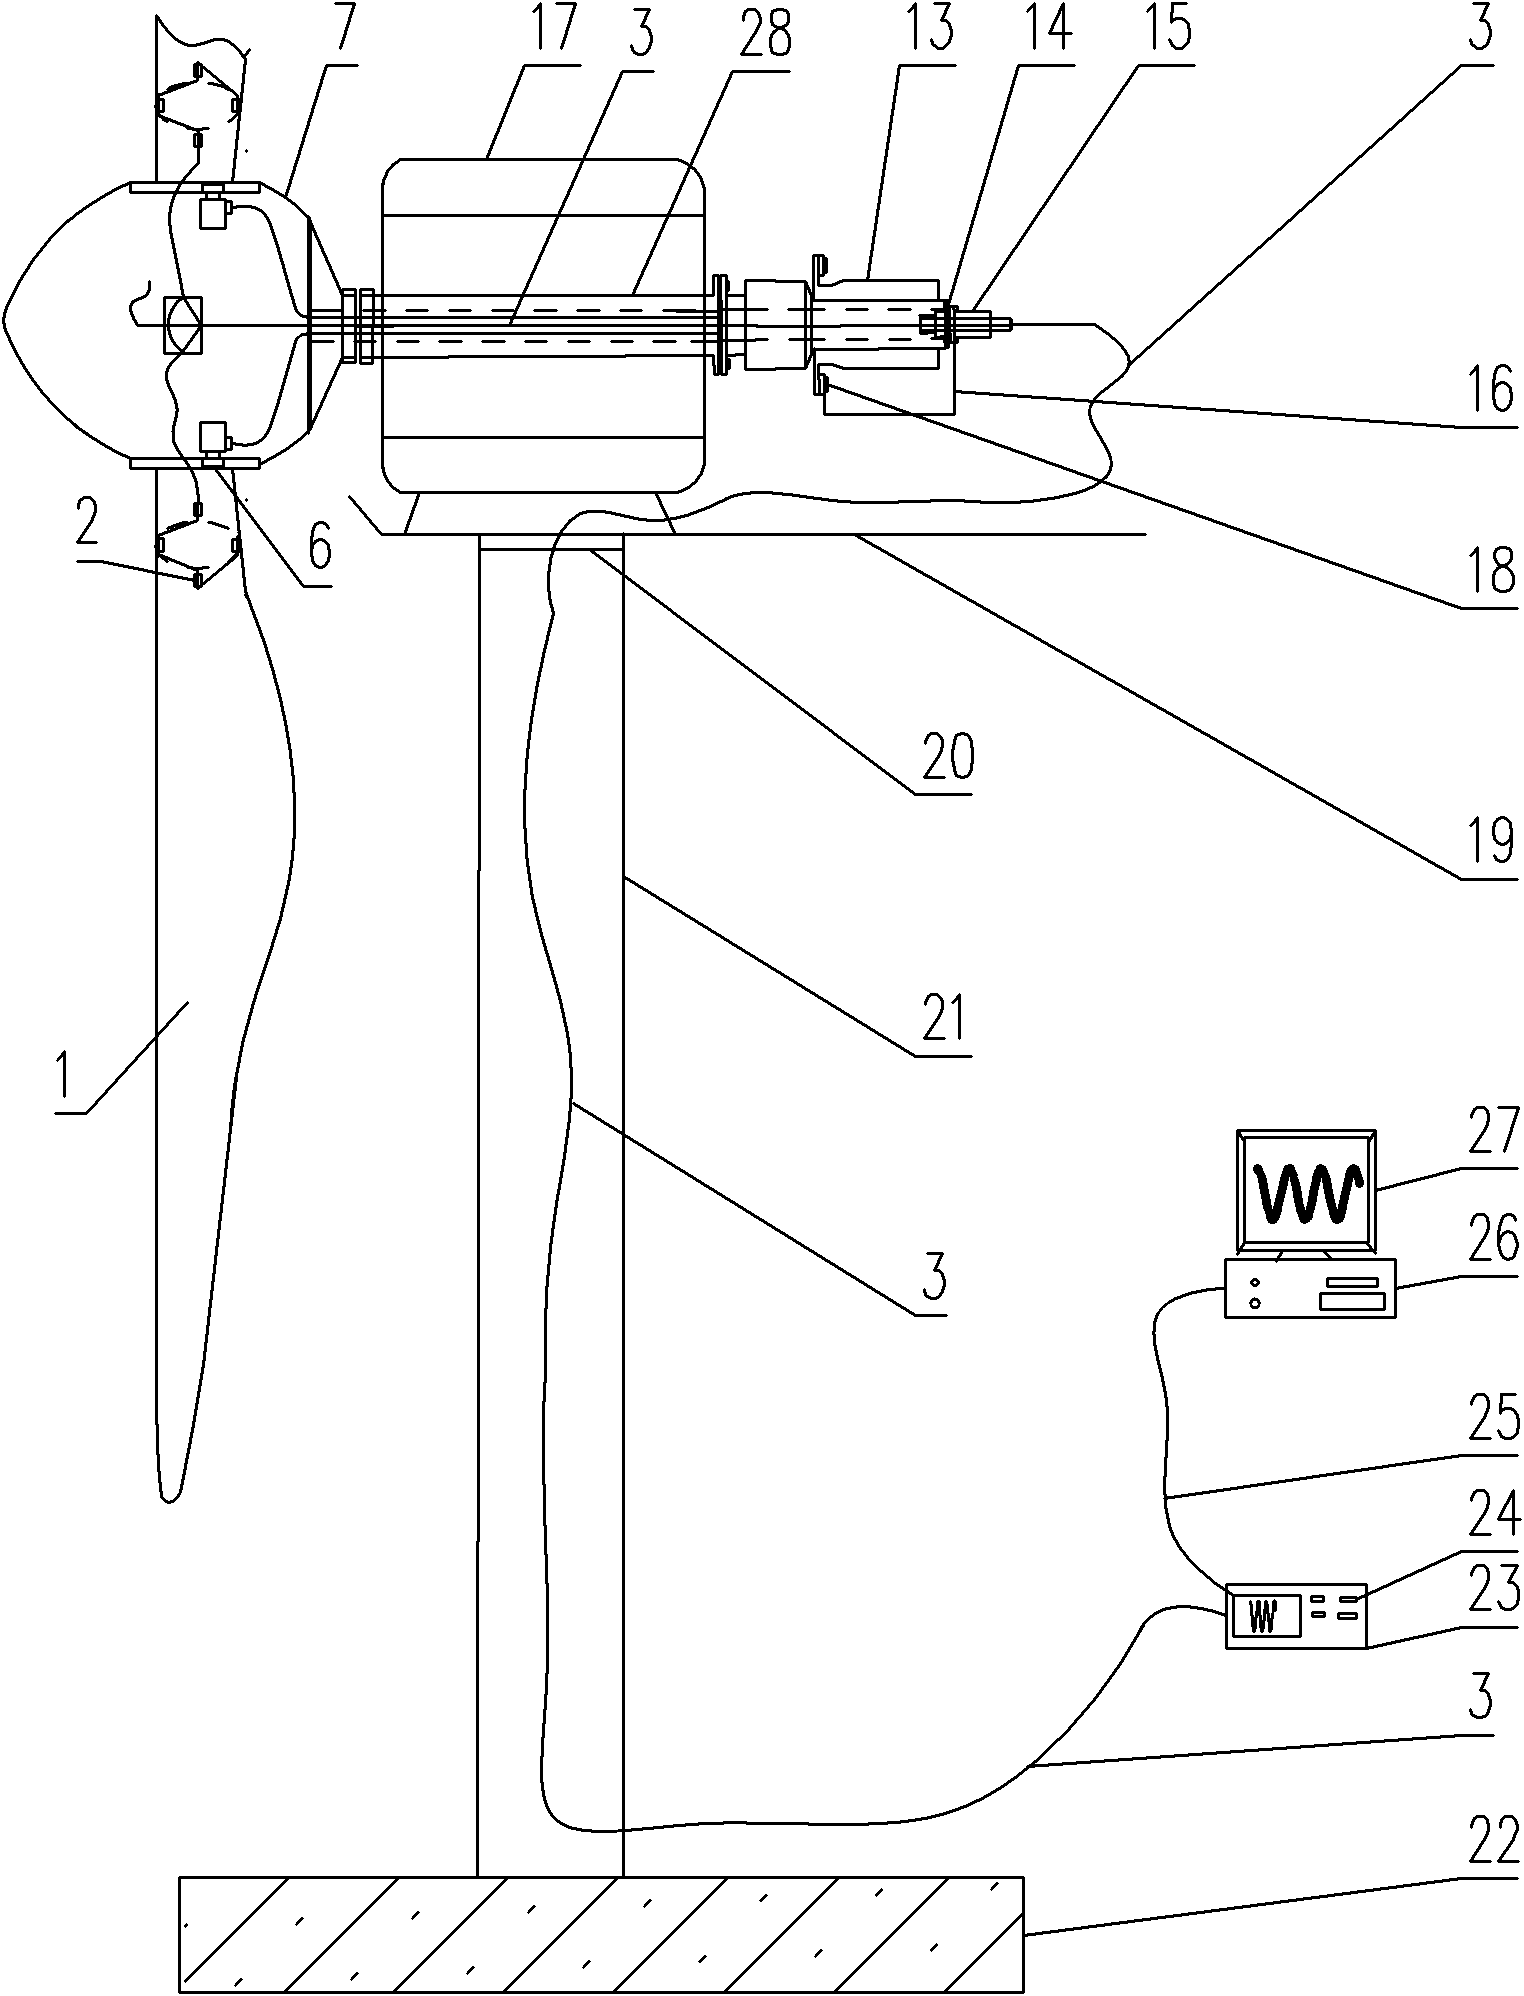 Intelligent monitoring device for blades of wind driven generator